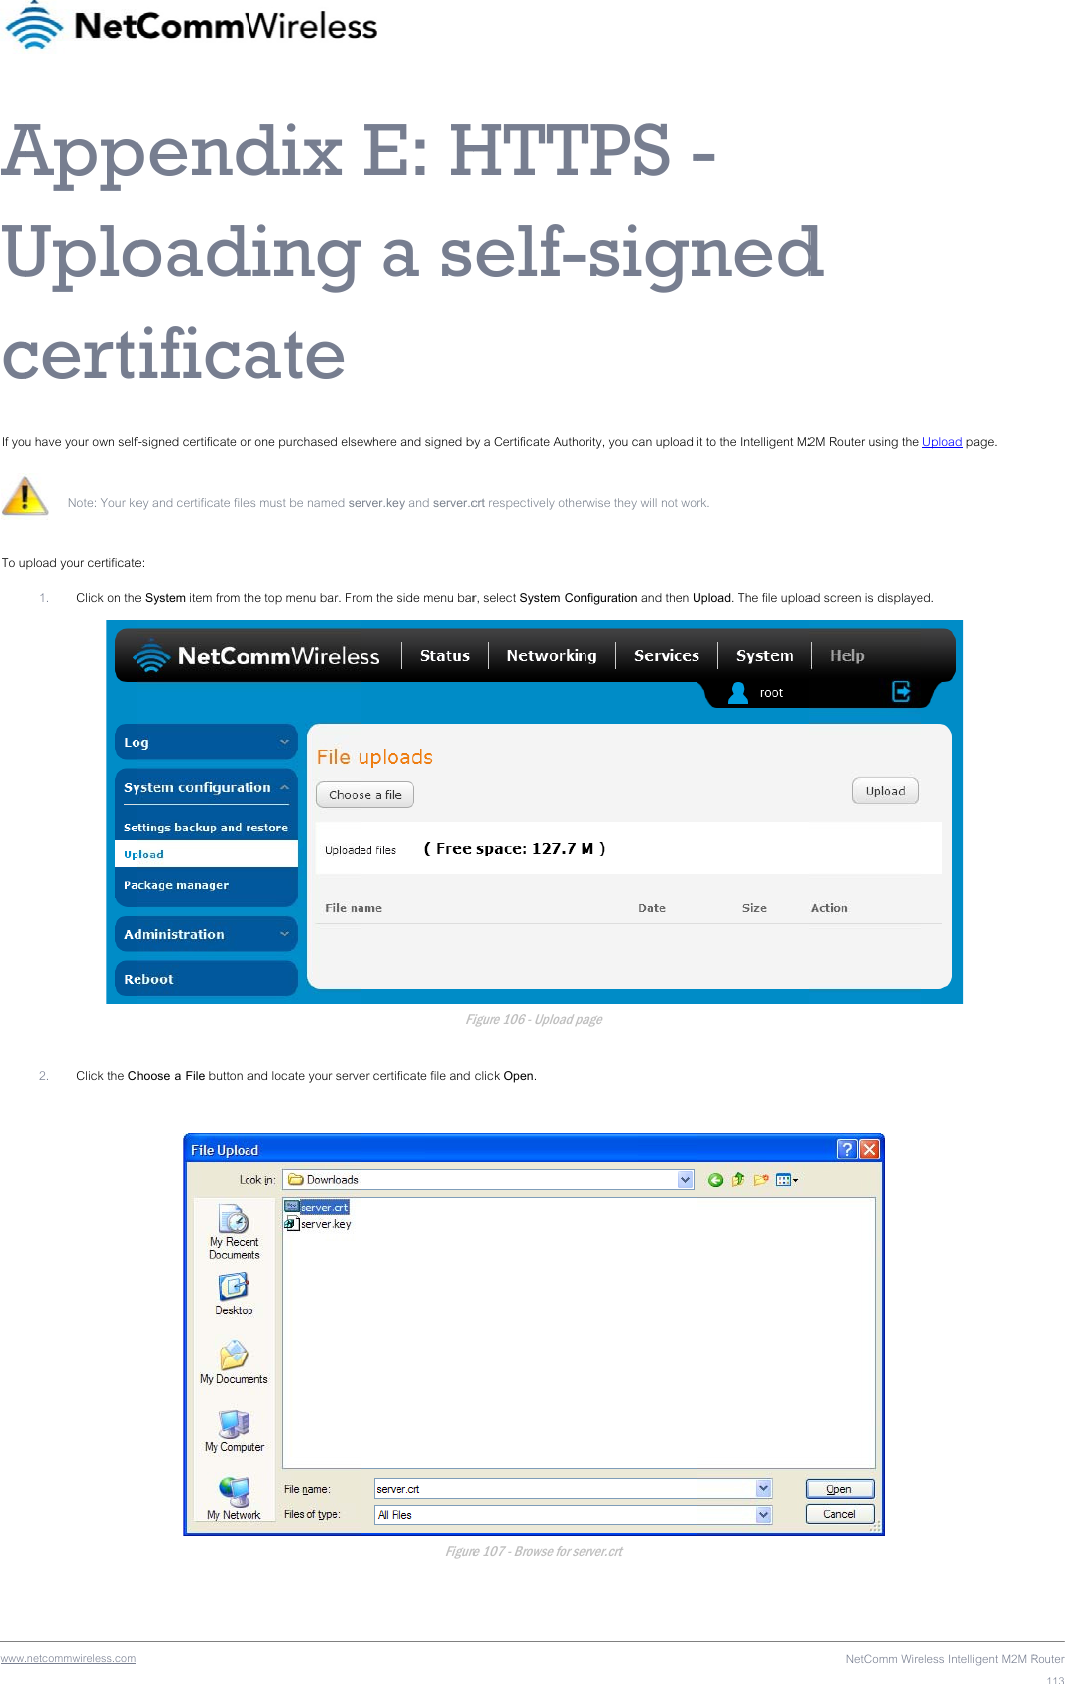 wwwAUcIf yoTo u  .netcommwireless.com AppUplocertu have your own self Note: Your ke pload your certificate1. Click on the2. Click the C pendoadificaf-signed certificate orey and certificate filee: e System item from thhoose a File button adix dingate r one purchased elsees must be named sehe top menu bar. Froand locate your serveE: Hg a s ewhere and signed brver.key and server.com the side menu barFier certificate file and FigureHTTelf-by a Certificate Authocrt respectively otherr, select System ConFigure 106 - Upload pa click Open. re 107 - Browse for seTPS --signrity, you can upload rwise they will not wonfiguration and then Uage erver.crt - nedit to the Intelligent M2rk. Upload. The file uploaNetComm Wired 2M Router using the ad screen is displaye eless Intelligent M2M R Upload page. ed.   Router113